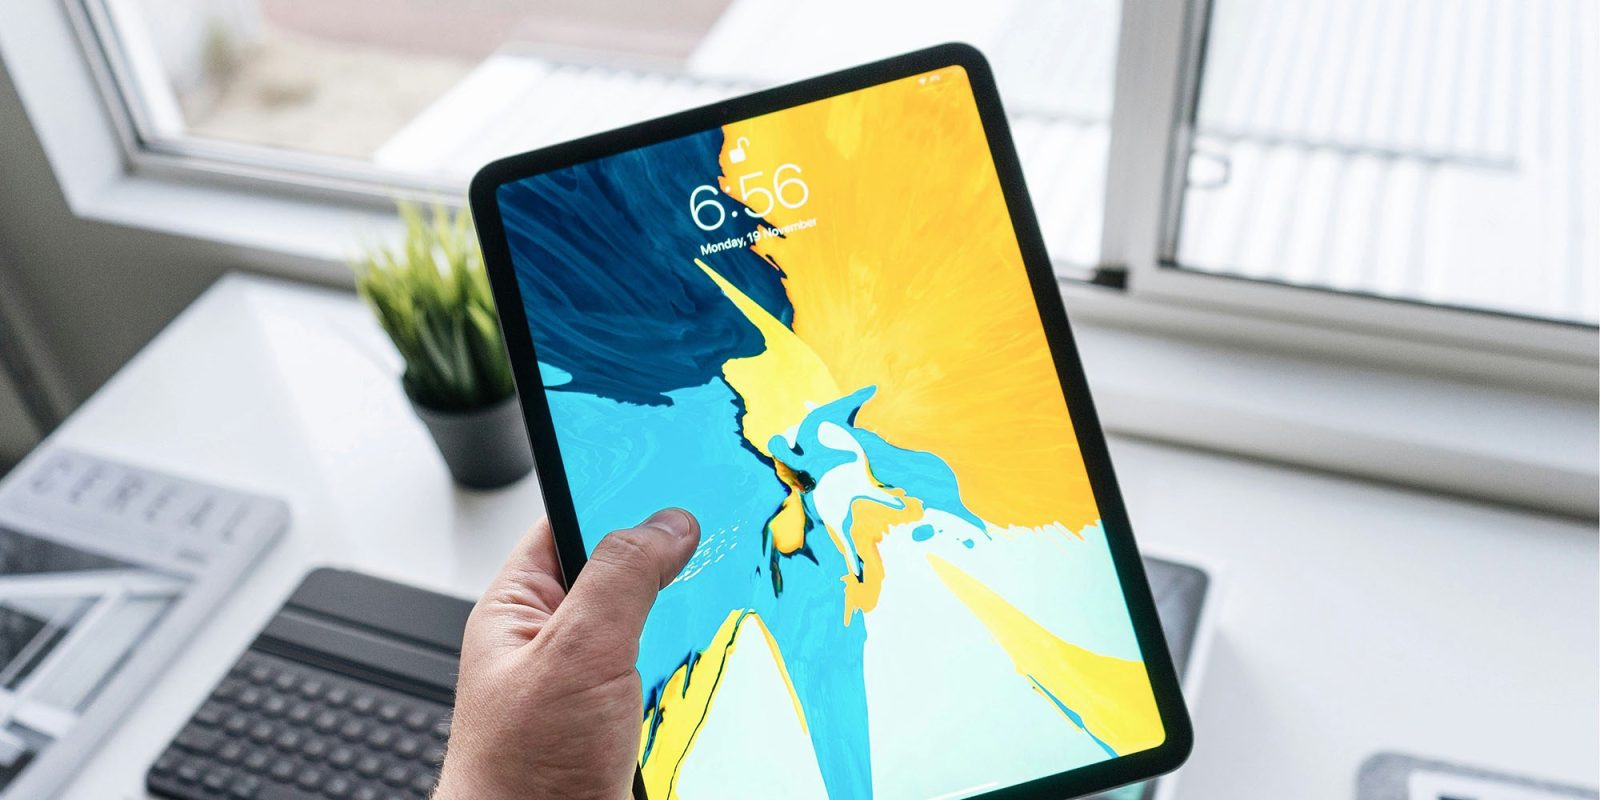 New iPads potentially revealed | Existing model shown